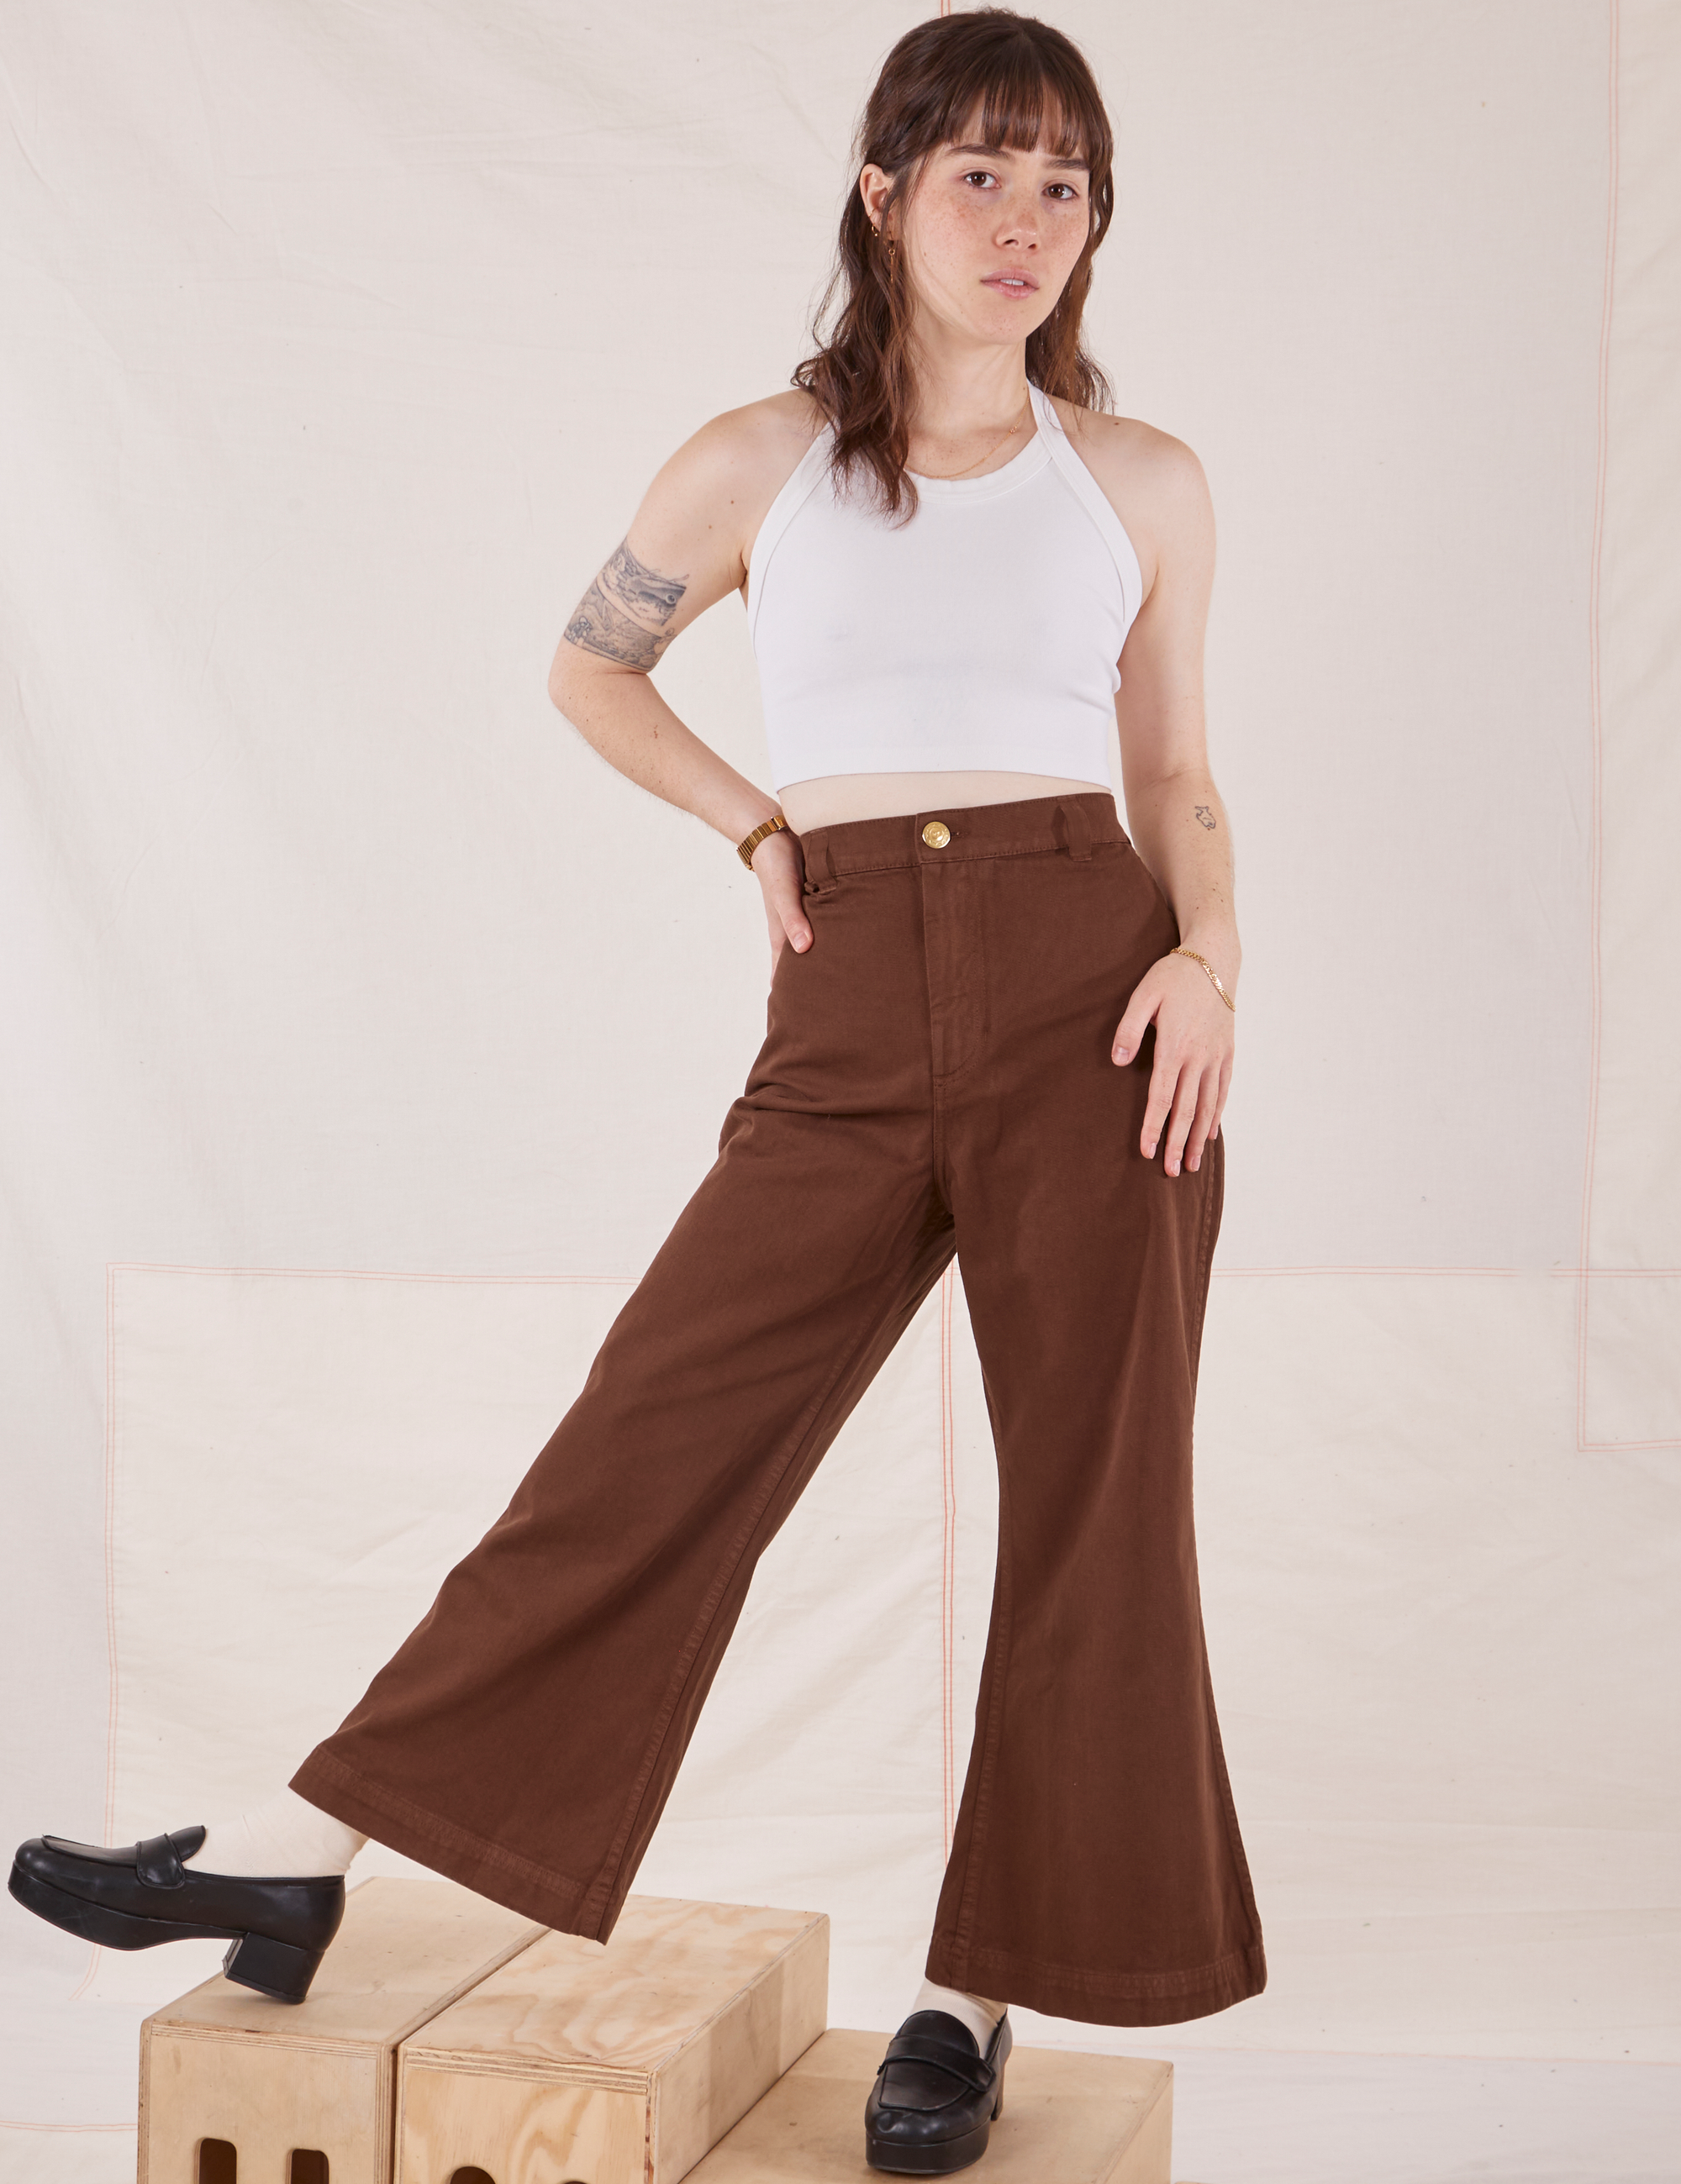 Hana is 5&#39;3&quot; and wearing P Petite Bell Bottoms in Fudgesicle Brown paired with vintage off-white Halter Top